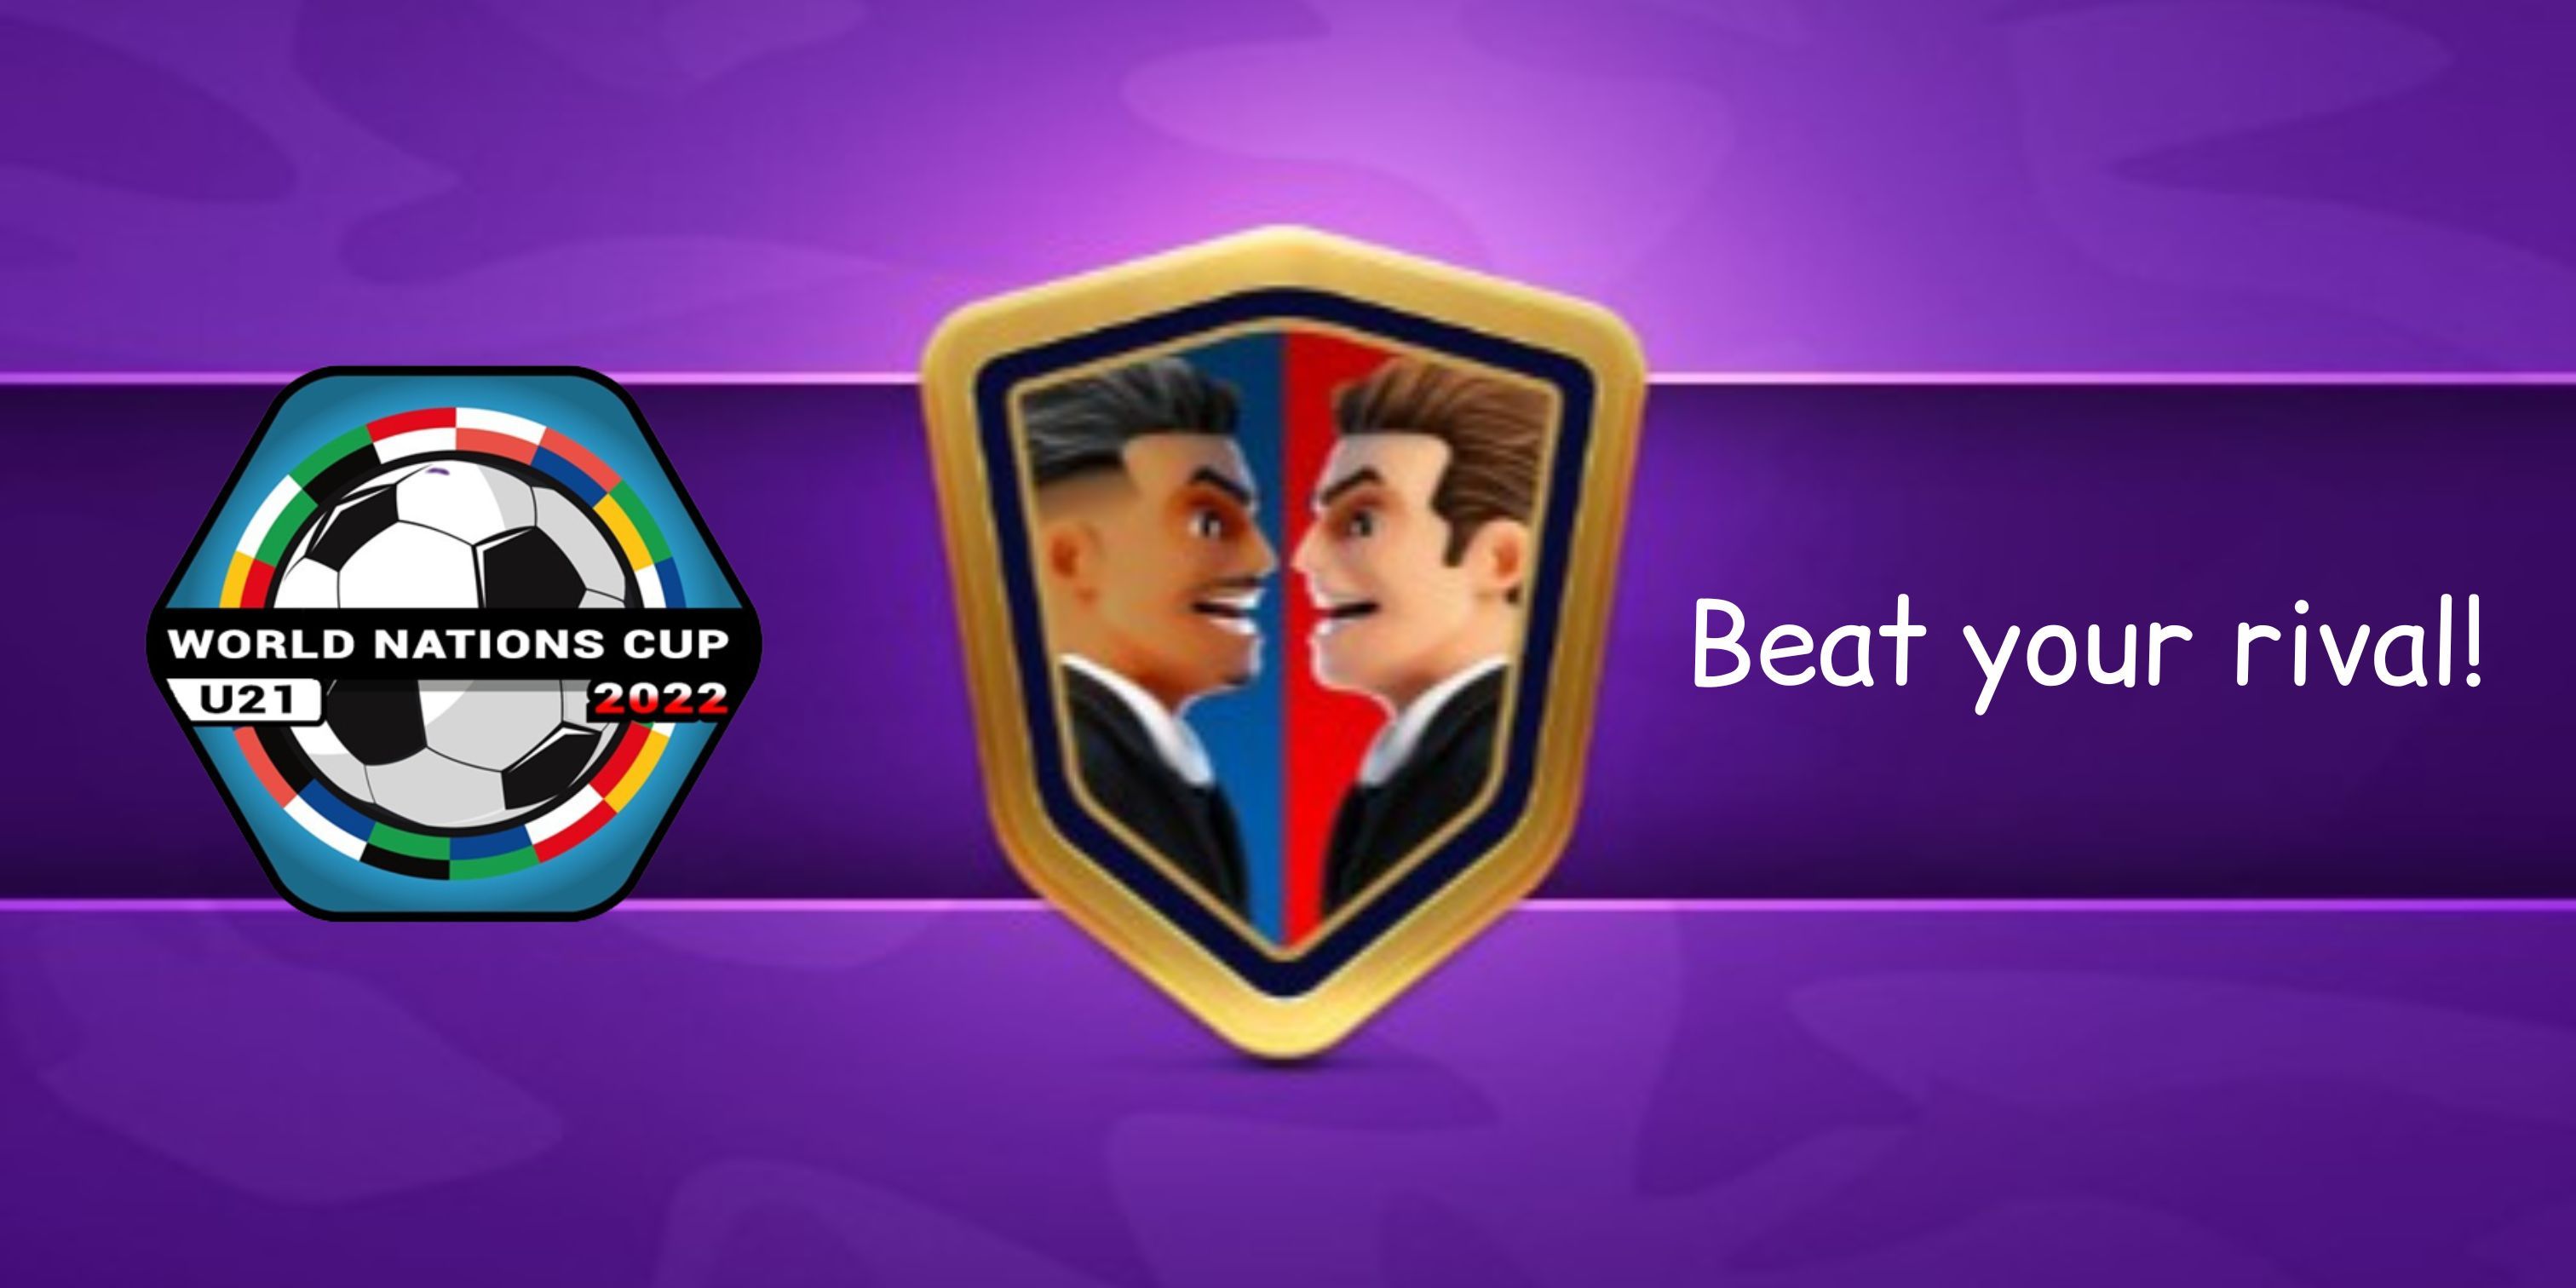 Beat your rival!.jpg